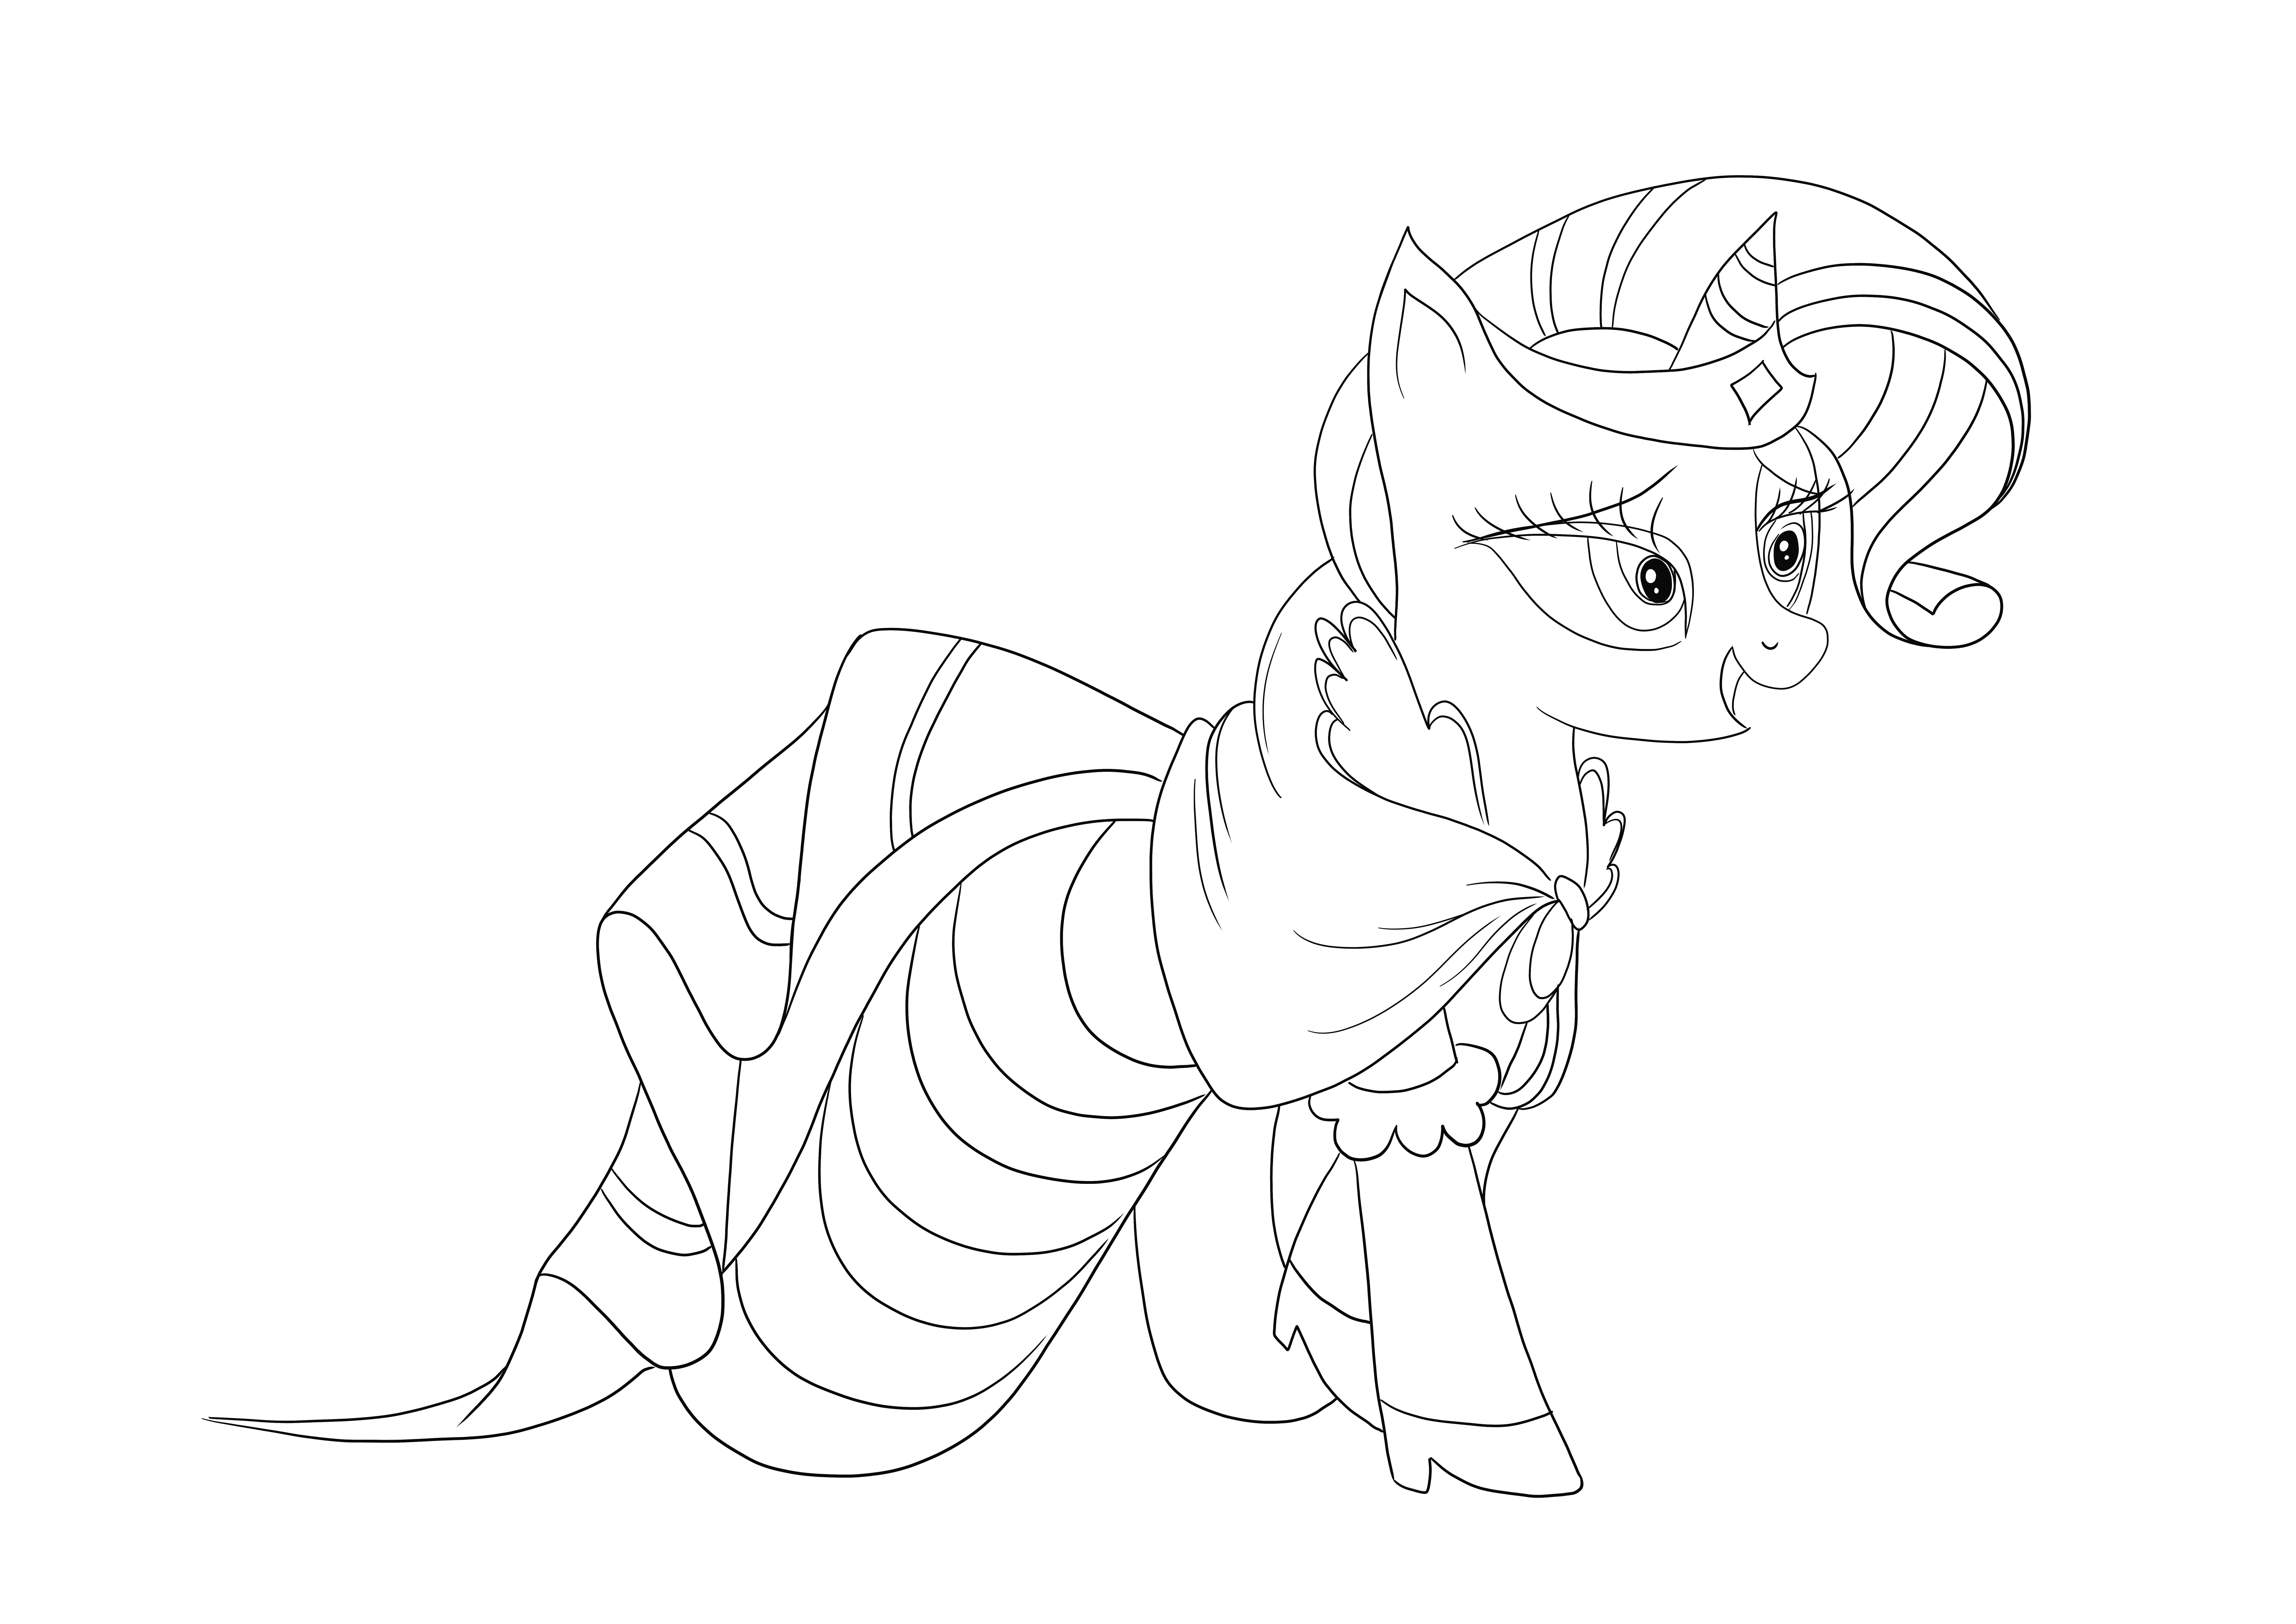 My Little Pony Rarity simple coloring sheet is waiting to be downloaded